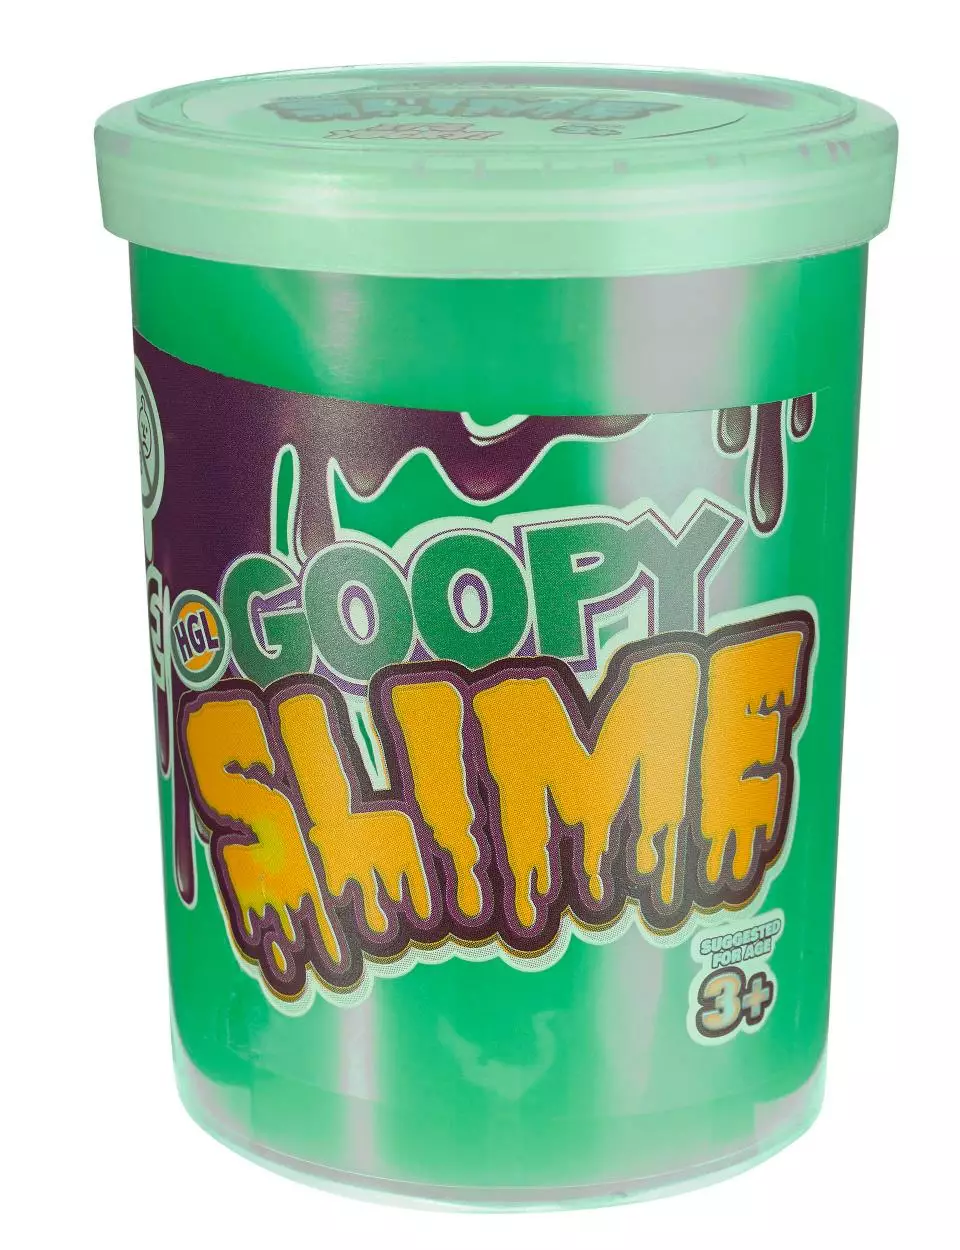 Goopy Slime, on sale at The Works, was also found to contain safe levels of the chemical.